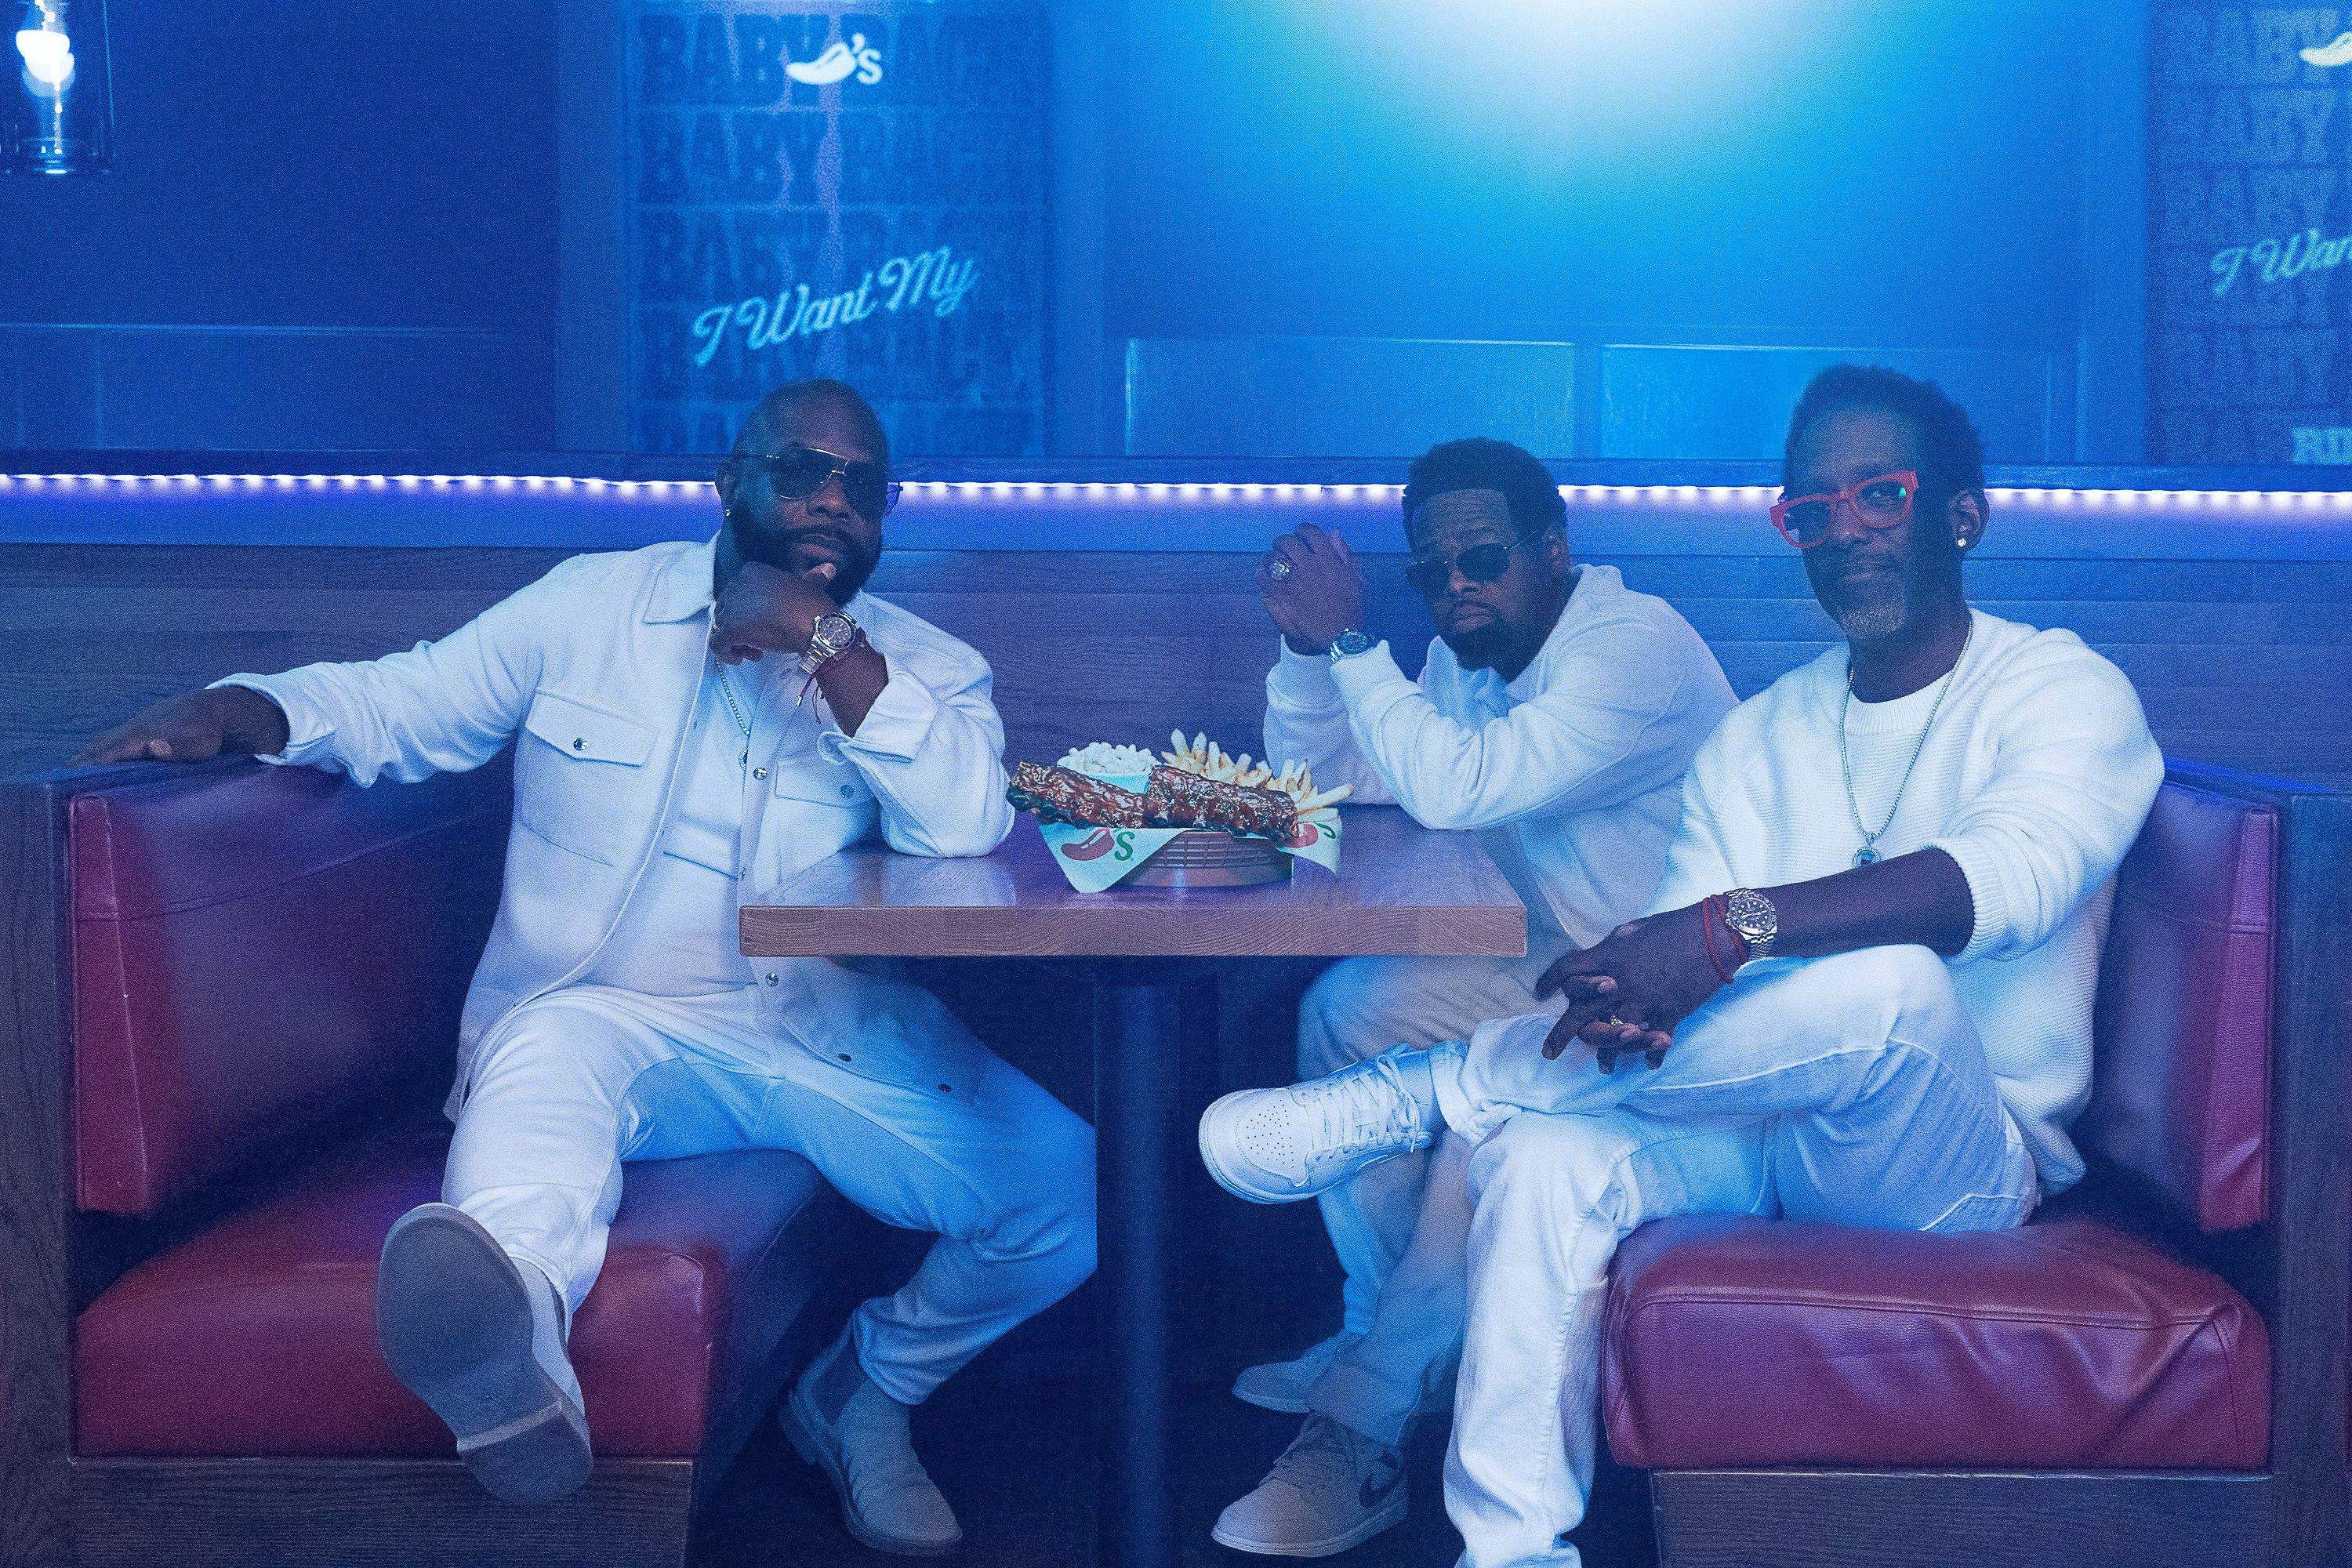 Boyz II Men in a booth at Chili's with baby back ribs